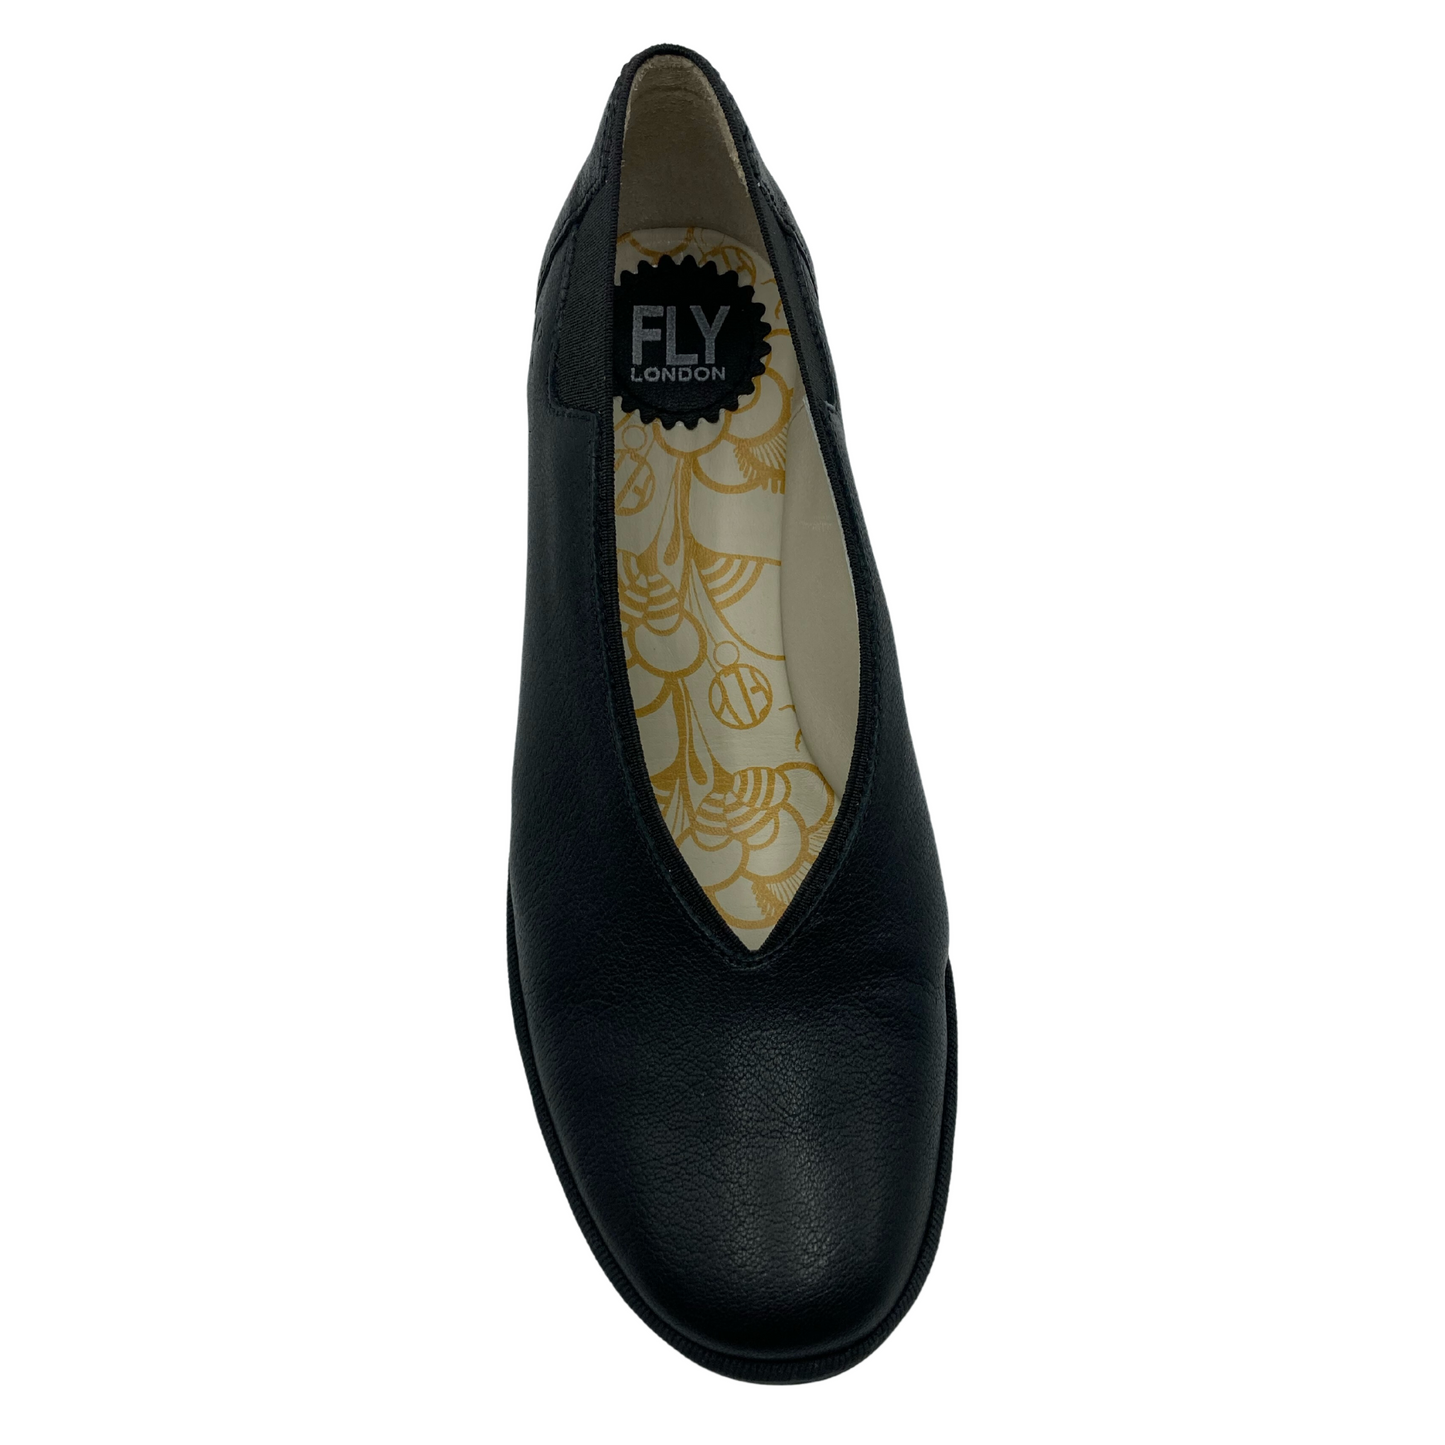 Top down view of black leather shoe with white and orange design on insole